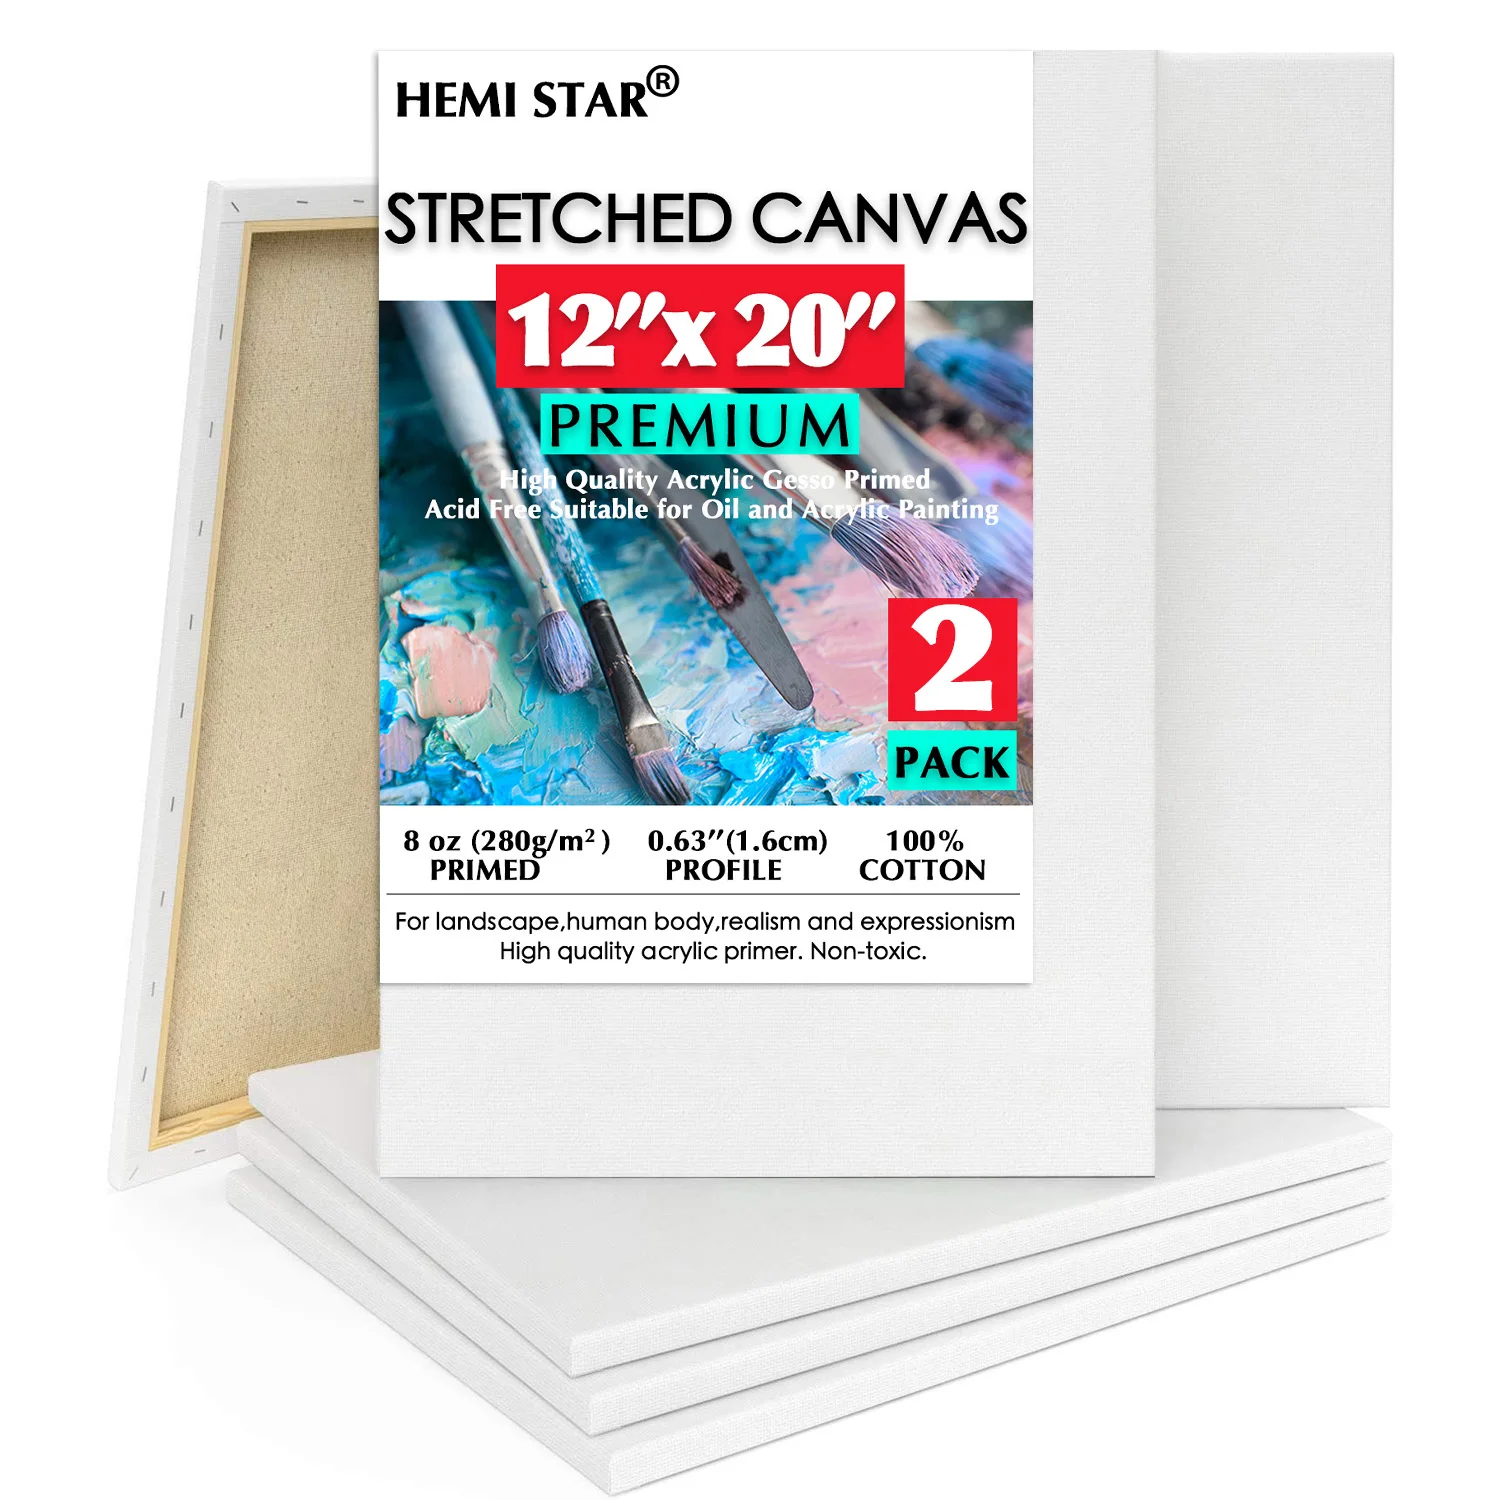 

2 Pack Stretched Canvas for Paint 30x50cm,12x20 inch Primed White 100% Cotton Blank Canvas Boards for Painting 8 oz Gesso-Primed